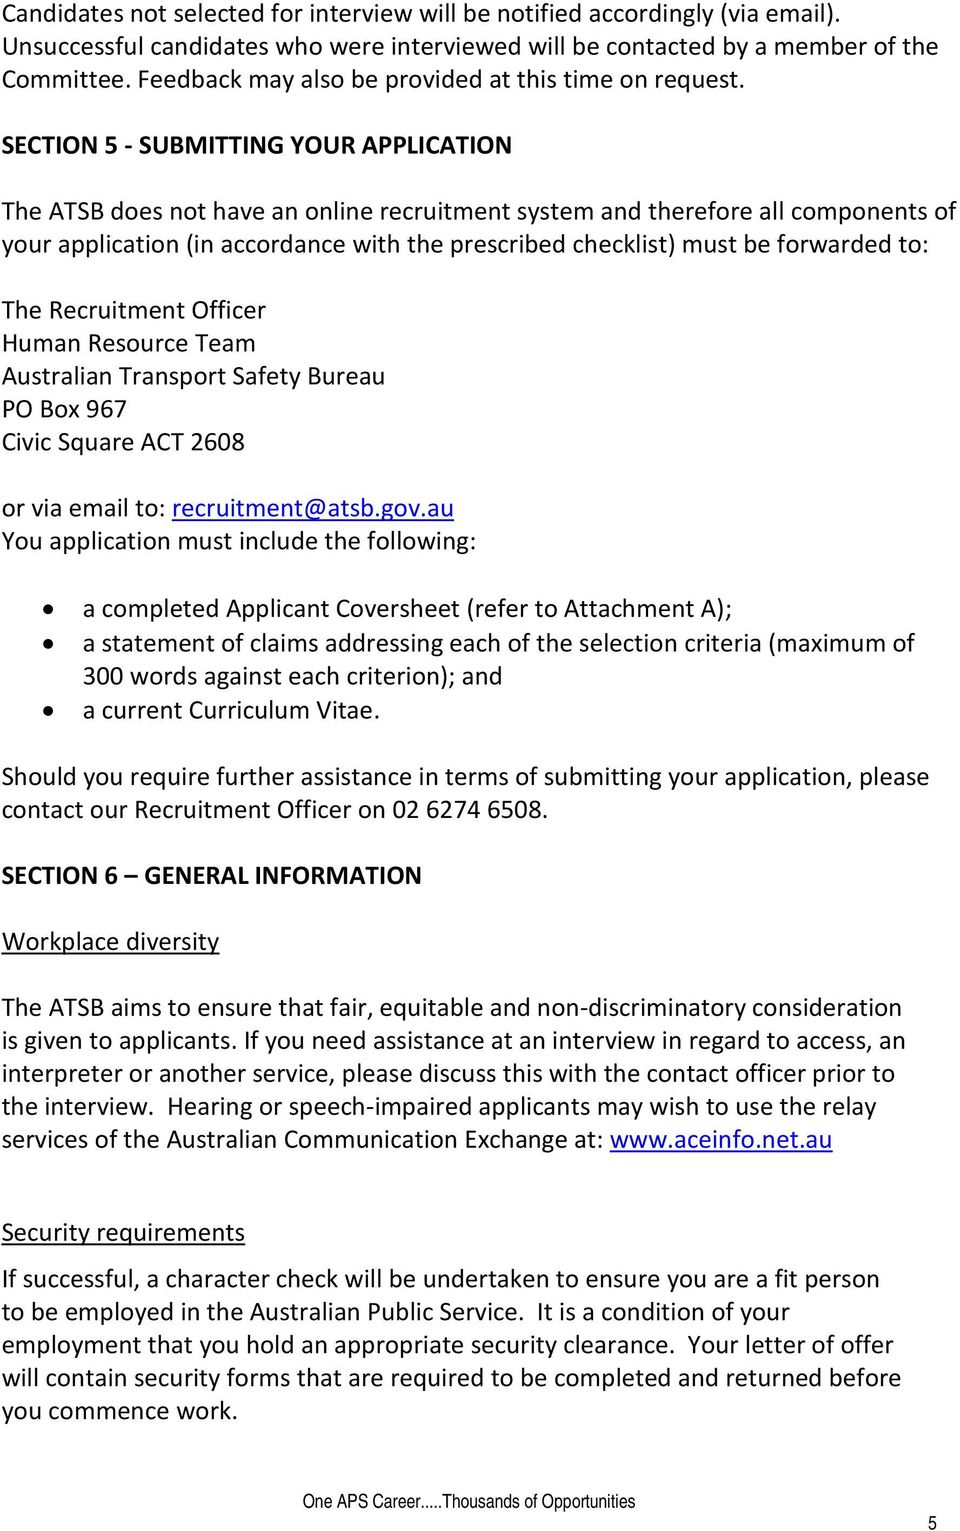 SECTION 5 - SUBMITTING YOUR APPLICATION The ATSB does not have an online recruitment system and therefore all components of your application (in accordance with the prescribed checklist) must be